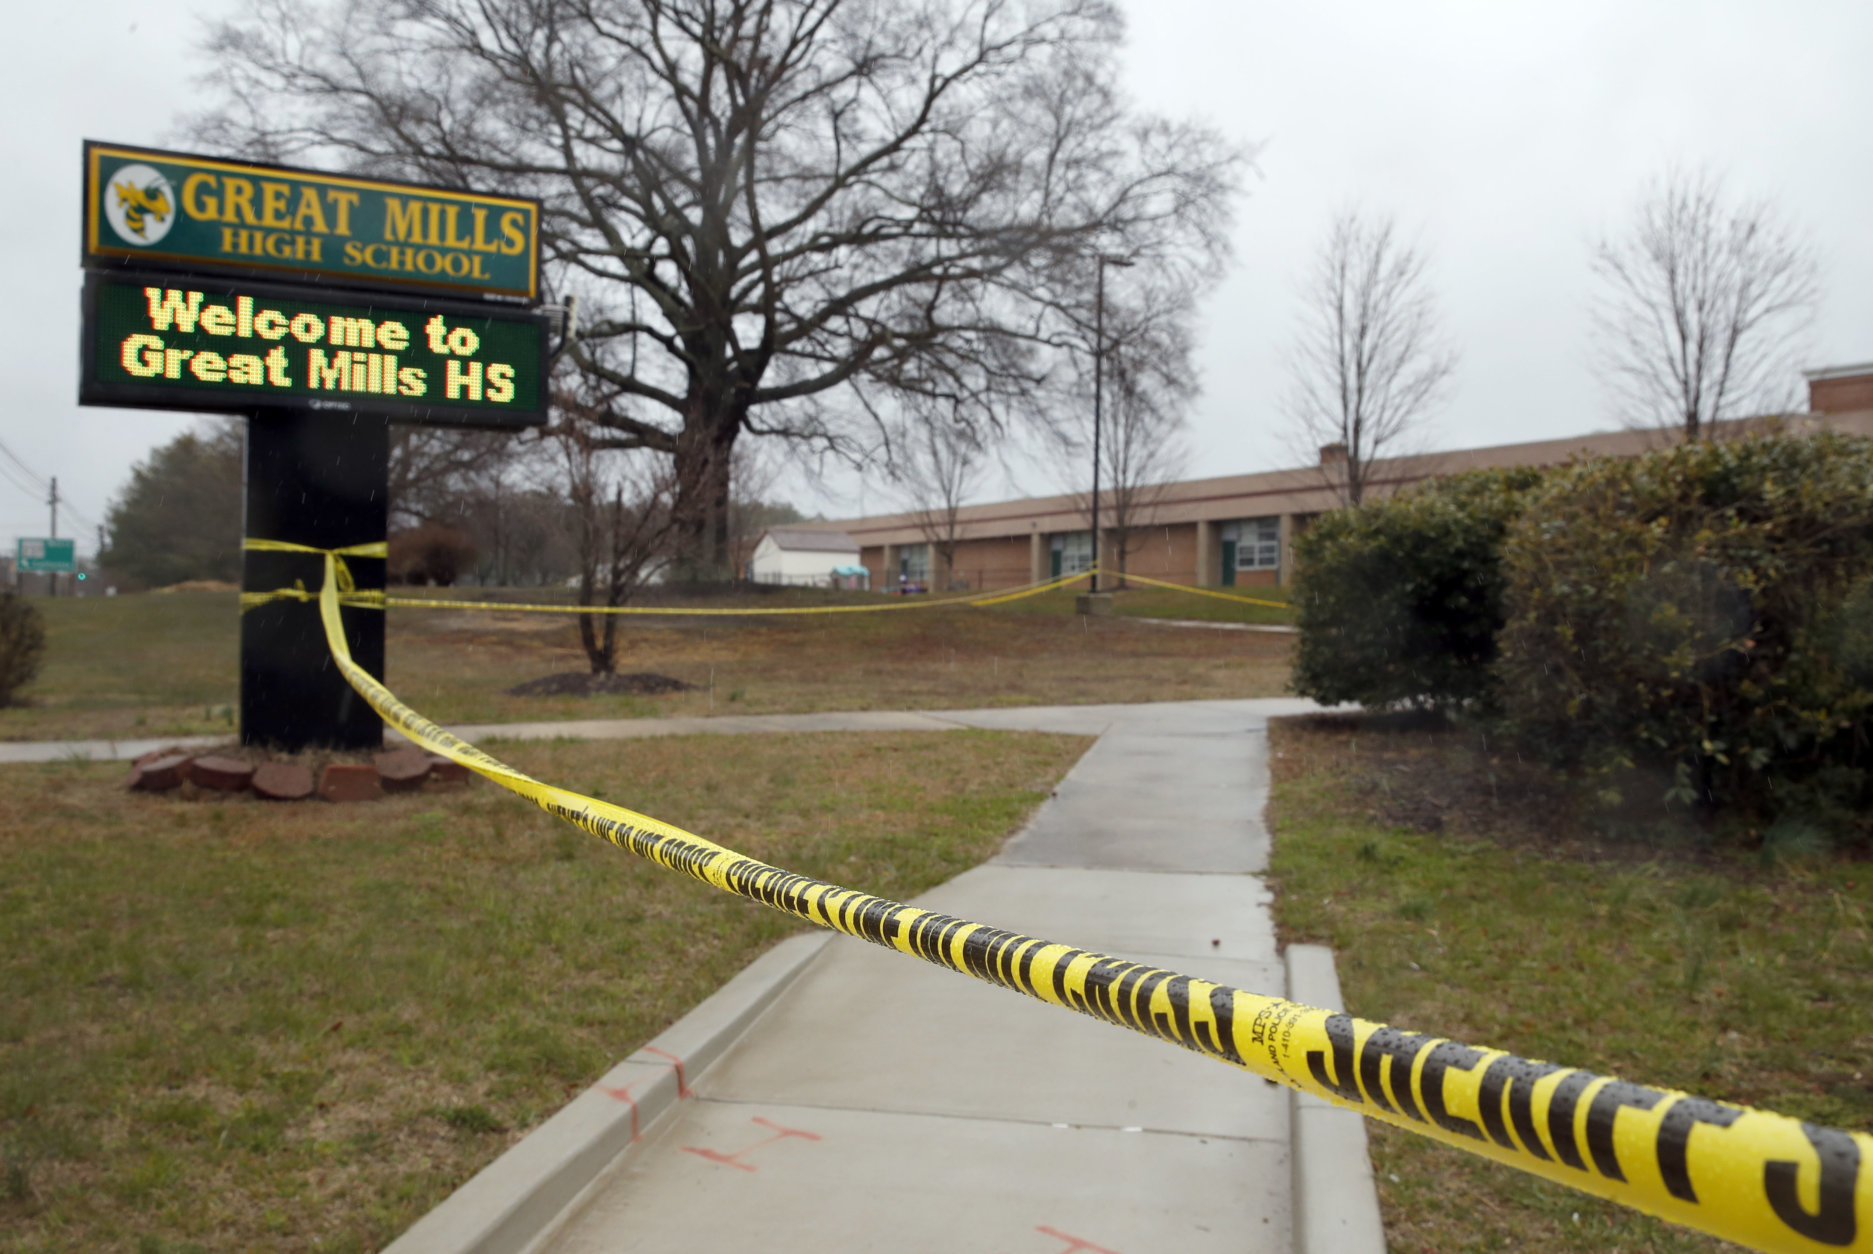 Crime scene tape is used around Great Mills High School, the scene of a shooting, Tuesday, March 20, 2018, in Great Mills. A student with a handgun shot two classmates inside the school before he was fatally wounded during a confrontation with a school resource officer, a sheriff said.  (AP Photo/Alex Brandon)